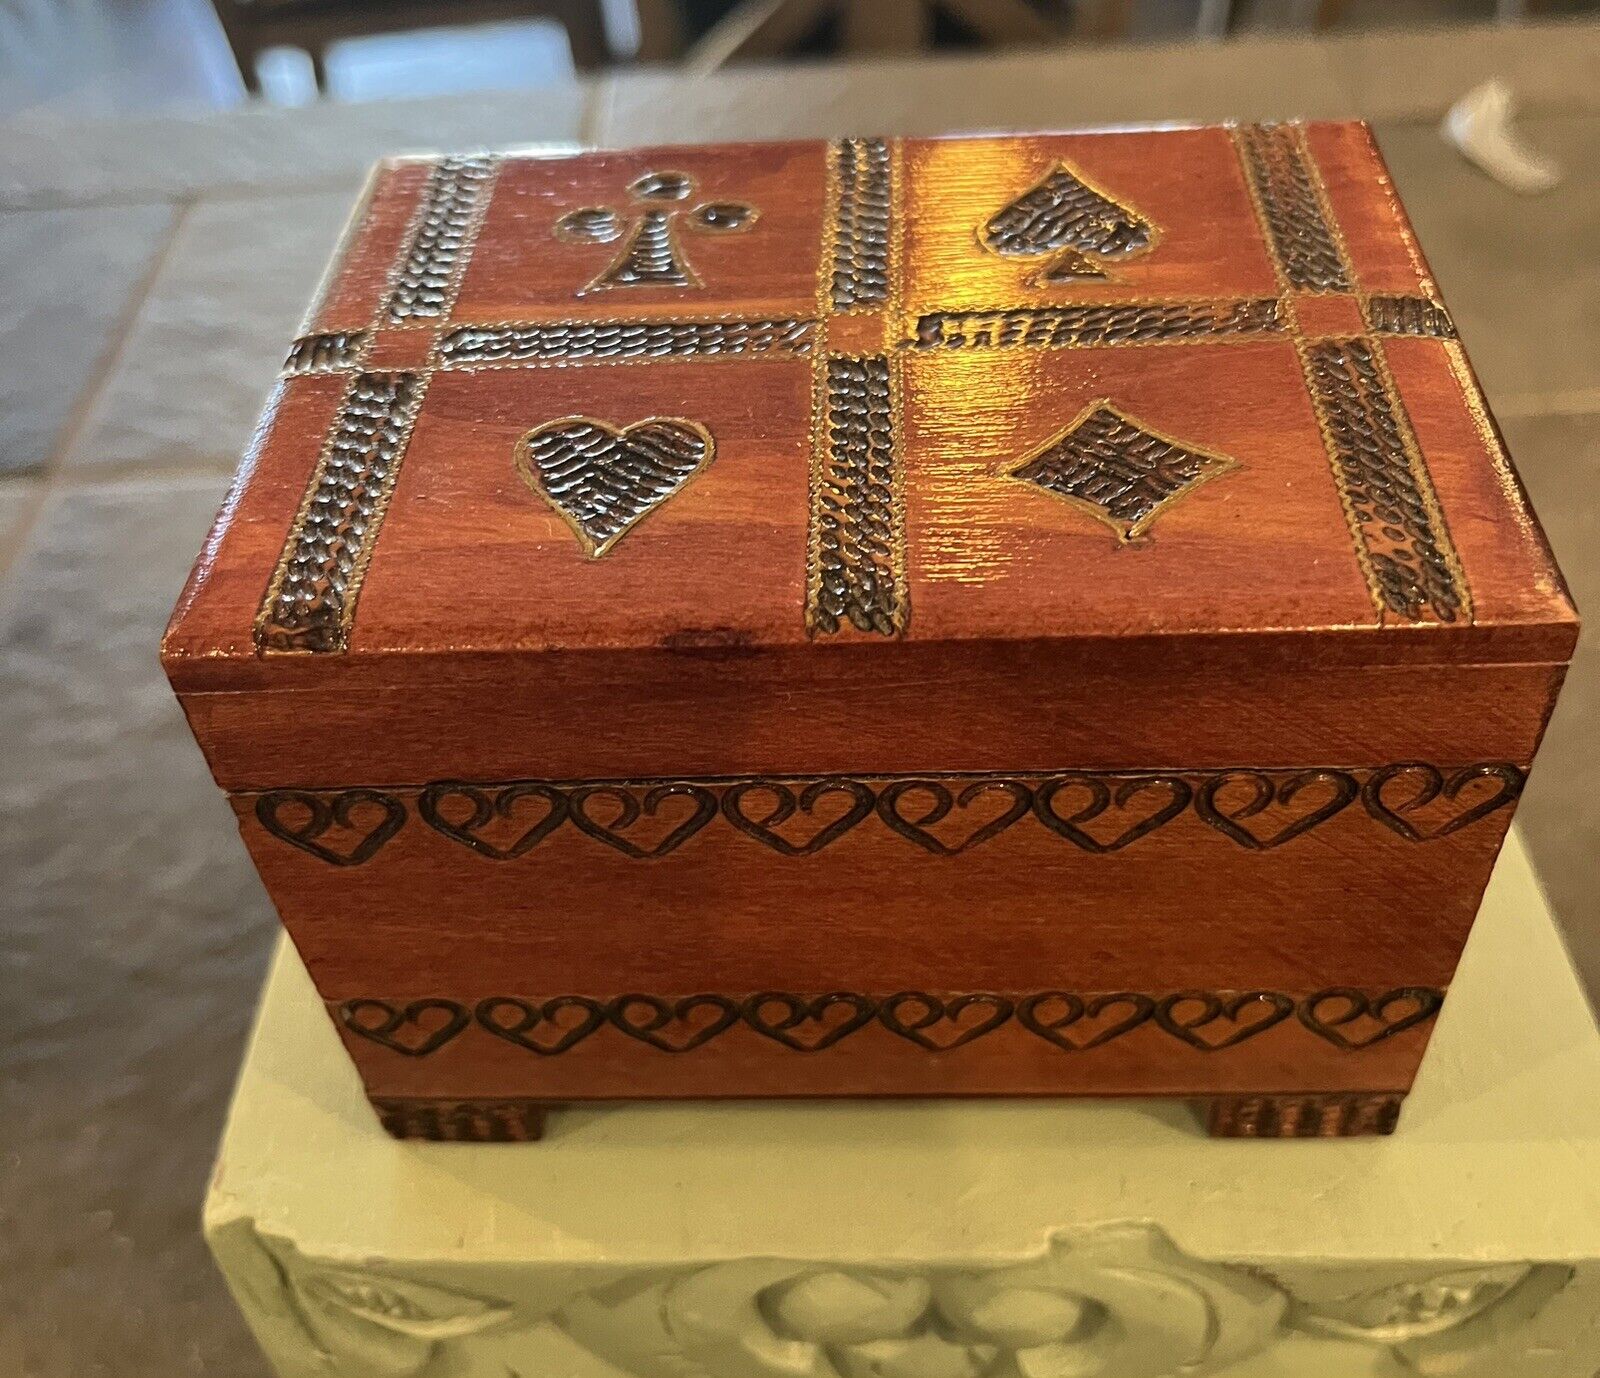 Vintage Hand Carved Wood Footed Card Jewelry Trinket Box                      A1